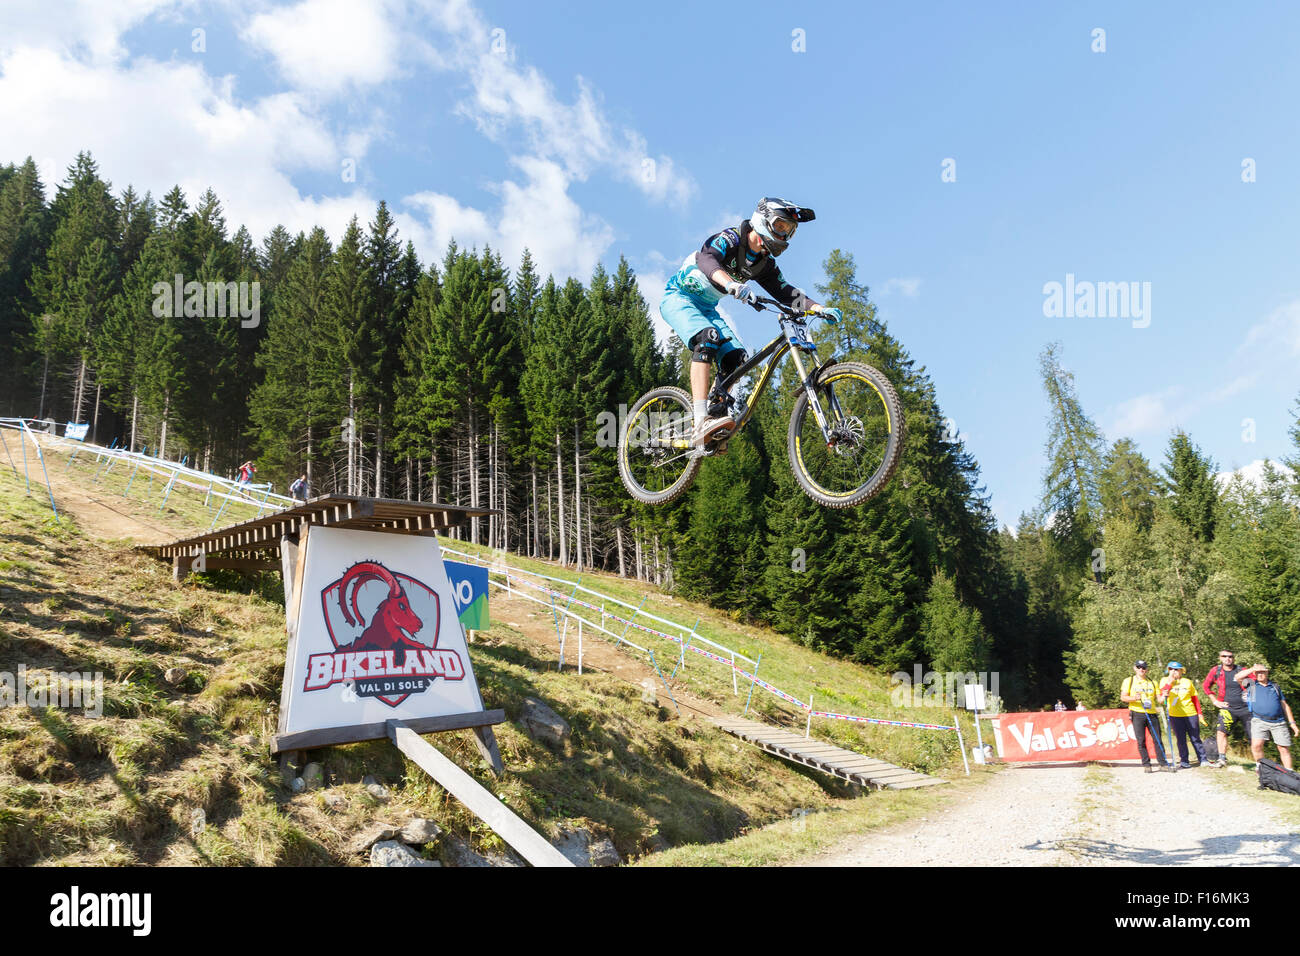 Val Di Sole, Italien - 22. August 2015: Solid-Reverse Factory Racing Team, Fahrer Barth Joshua in Aktion bergab Stockfoto